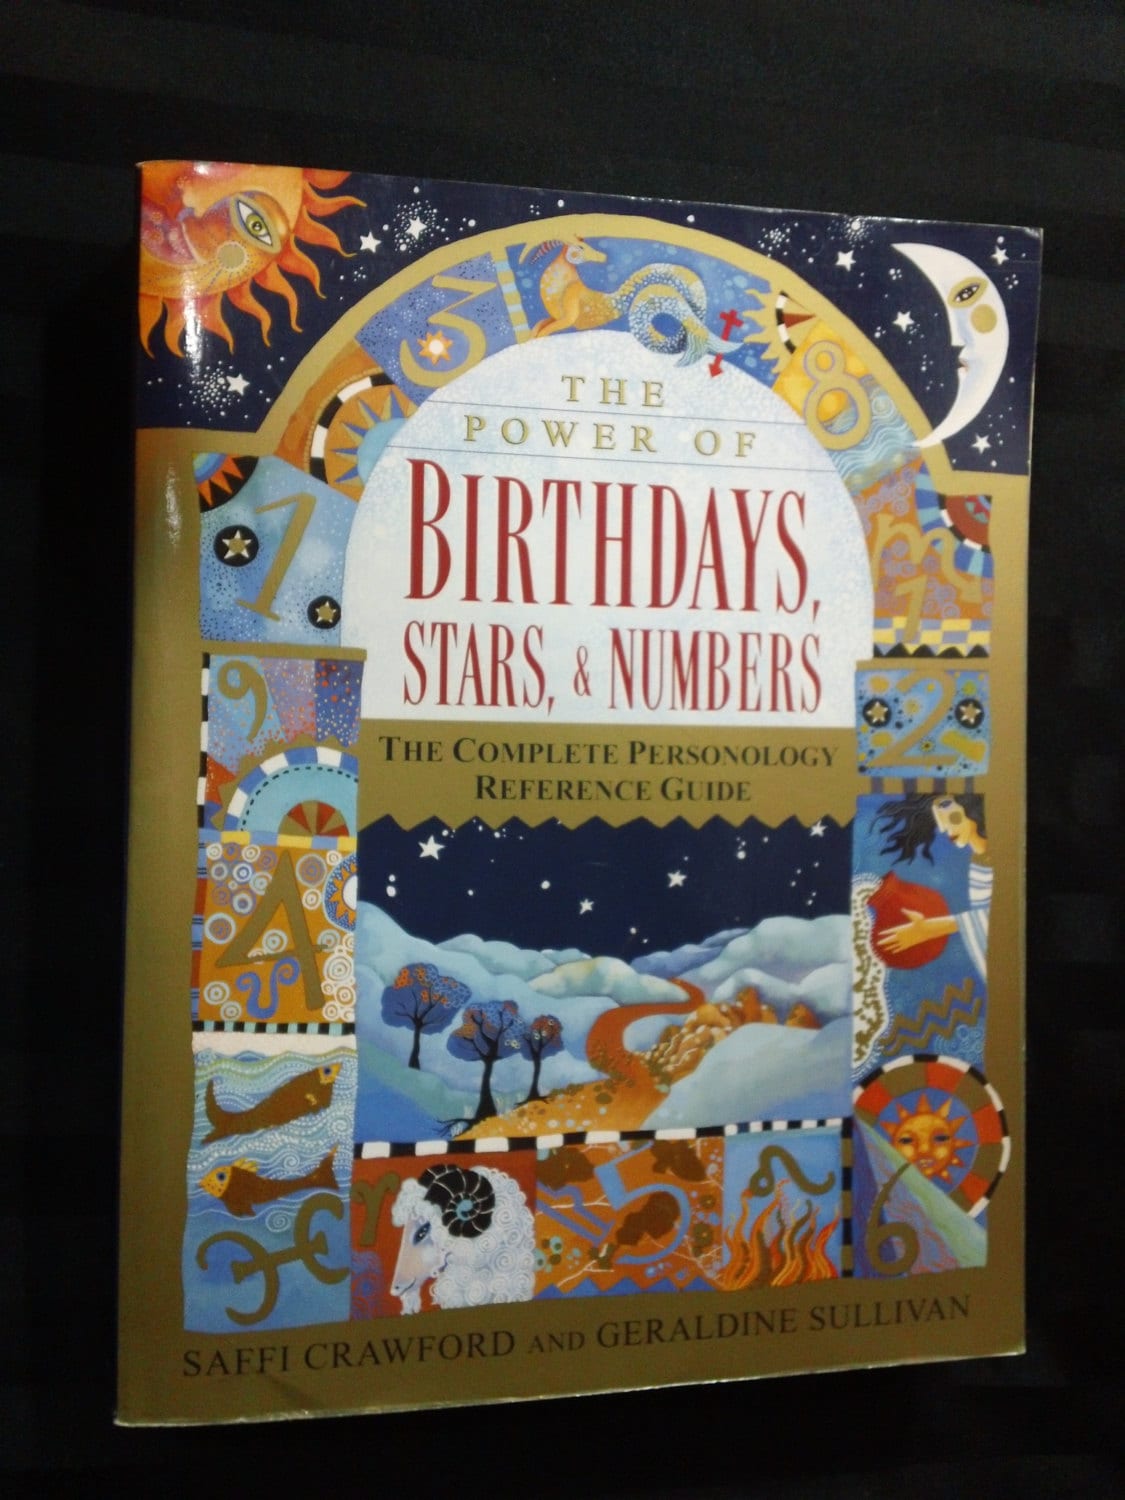 The Power of Birthdays Stars & Numbers by Saffi Crawford and